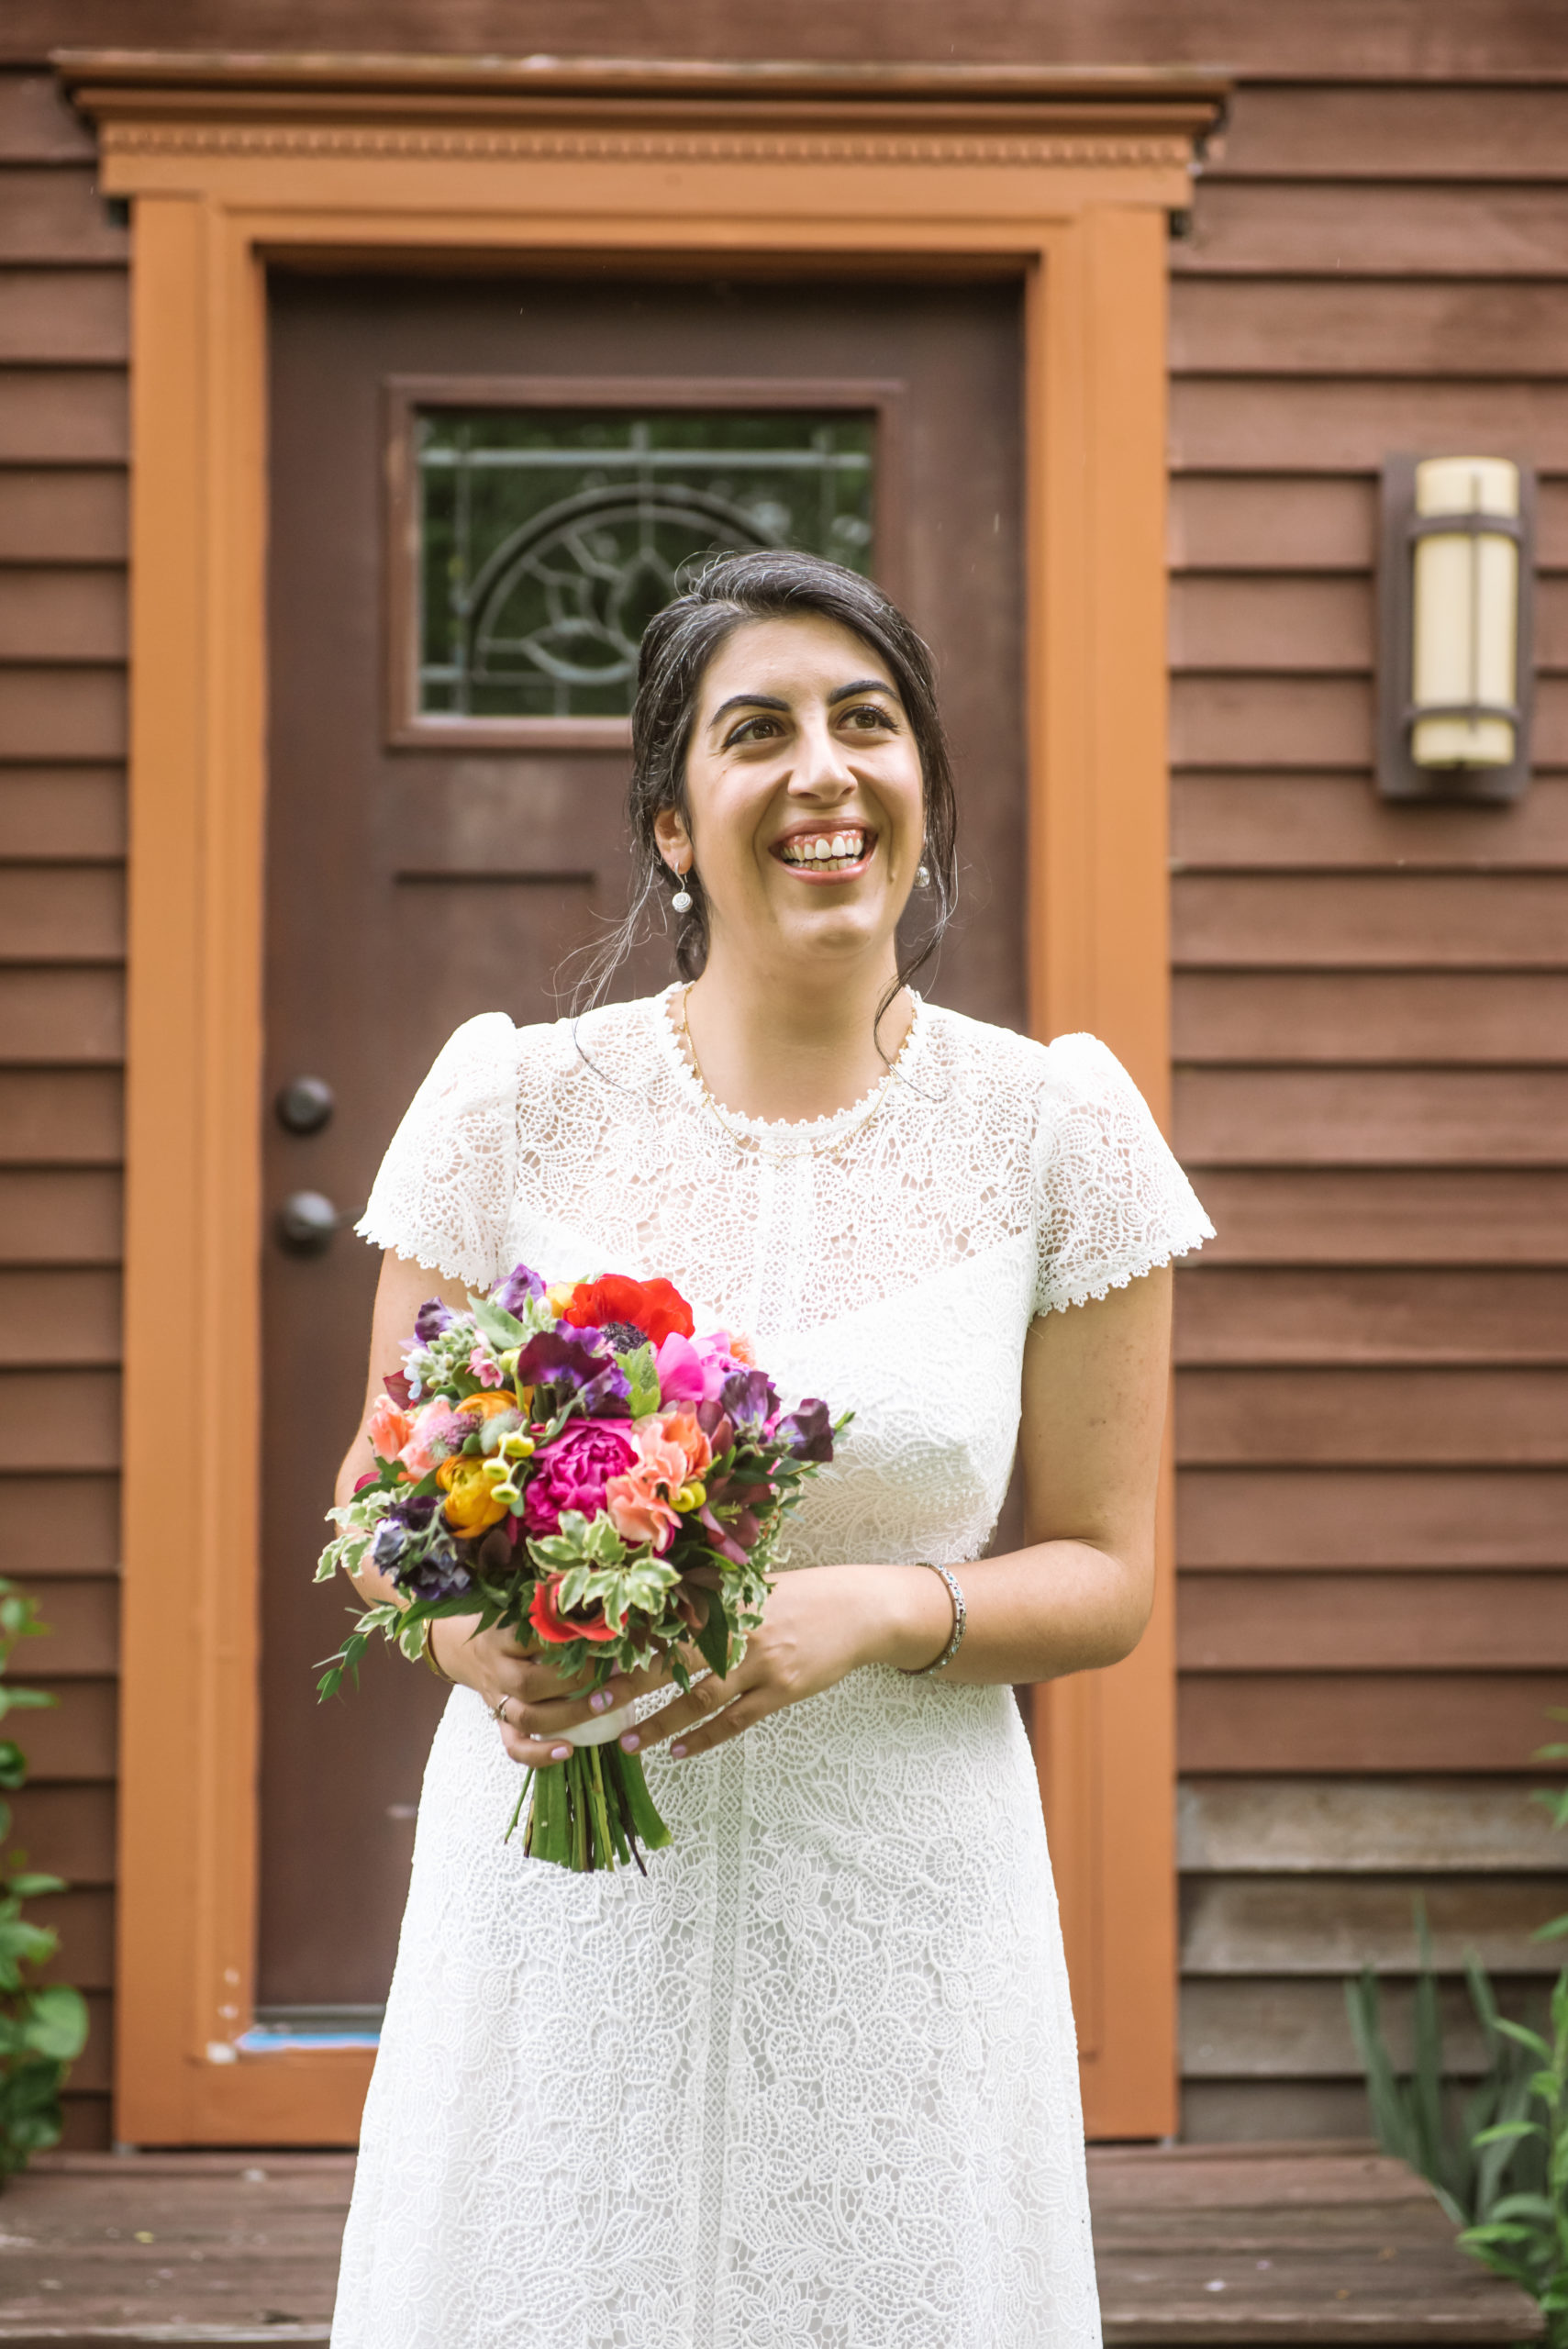 Bride holding her bouquet in her hands. She is wearing a white lace dress with short sleeves. She is standing in front of a dark red wood house's front door.